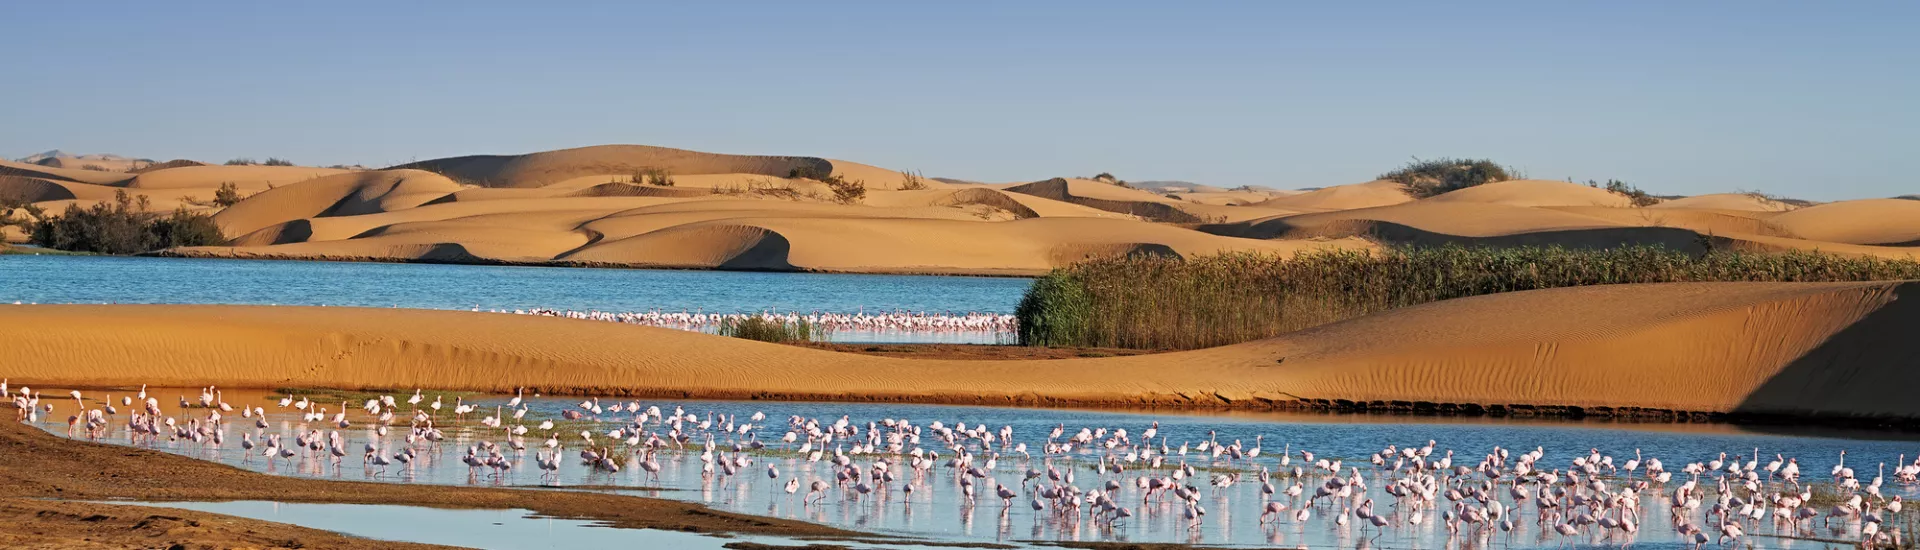 Flock of flamingos in a lagoon on Pelican Point, Walvis Bay, Namibia